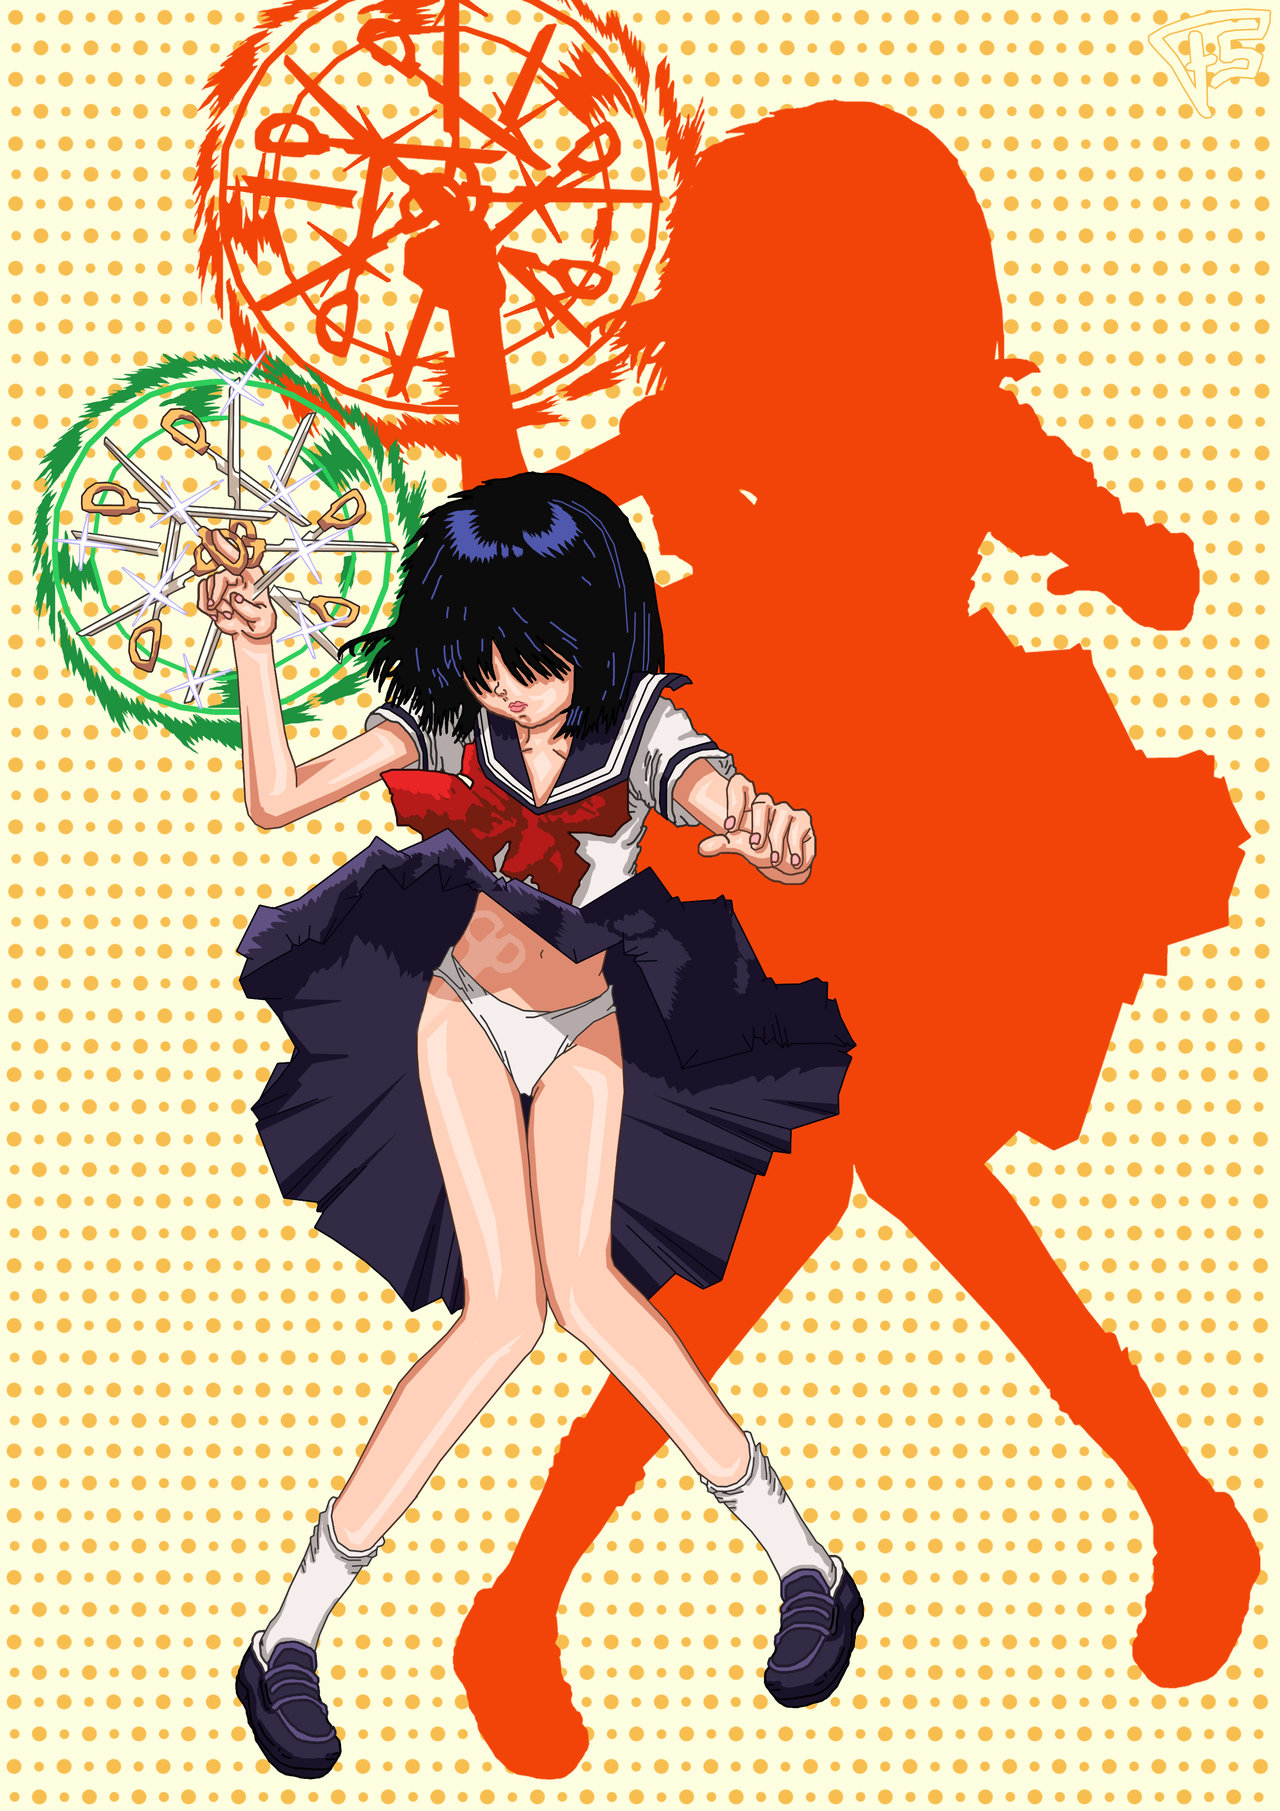 Mysterious Girlfriend X Backgrounds, Compatible - PC, Mobile, Gadgets| 1280x1811 px